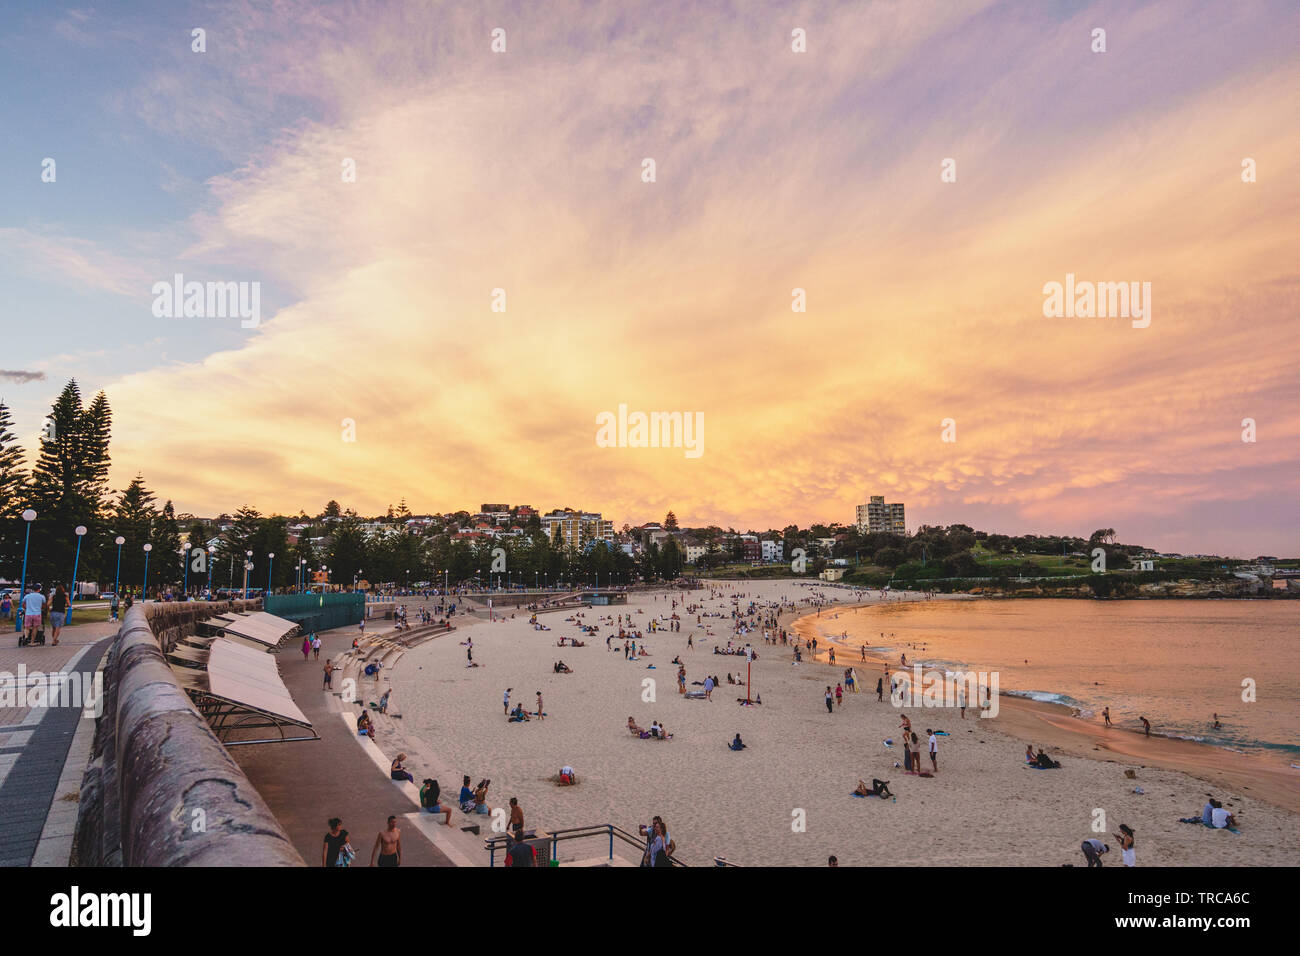 Farbenfroher Sonnenuntergang über Coogee Beach, New South Wales Stockfoto